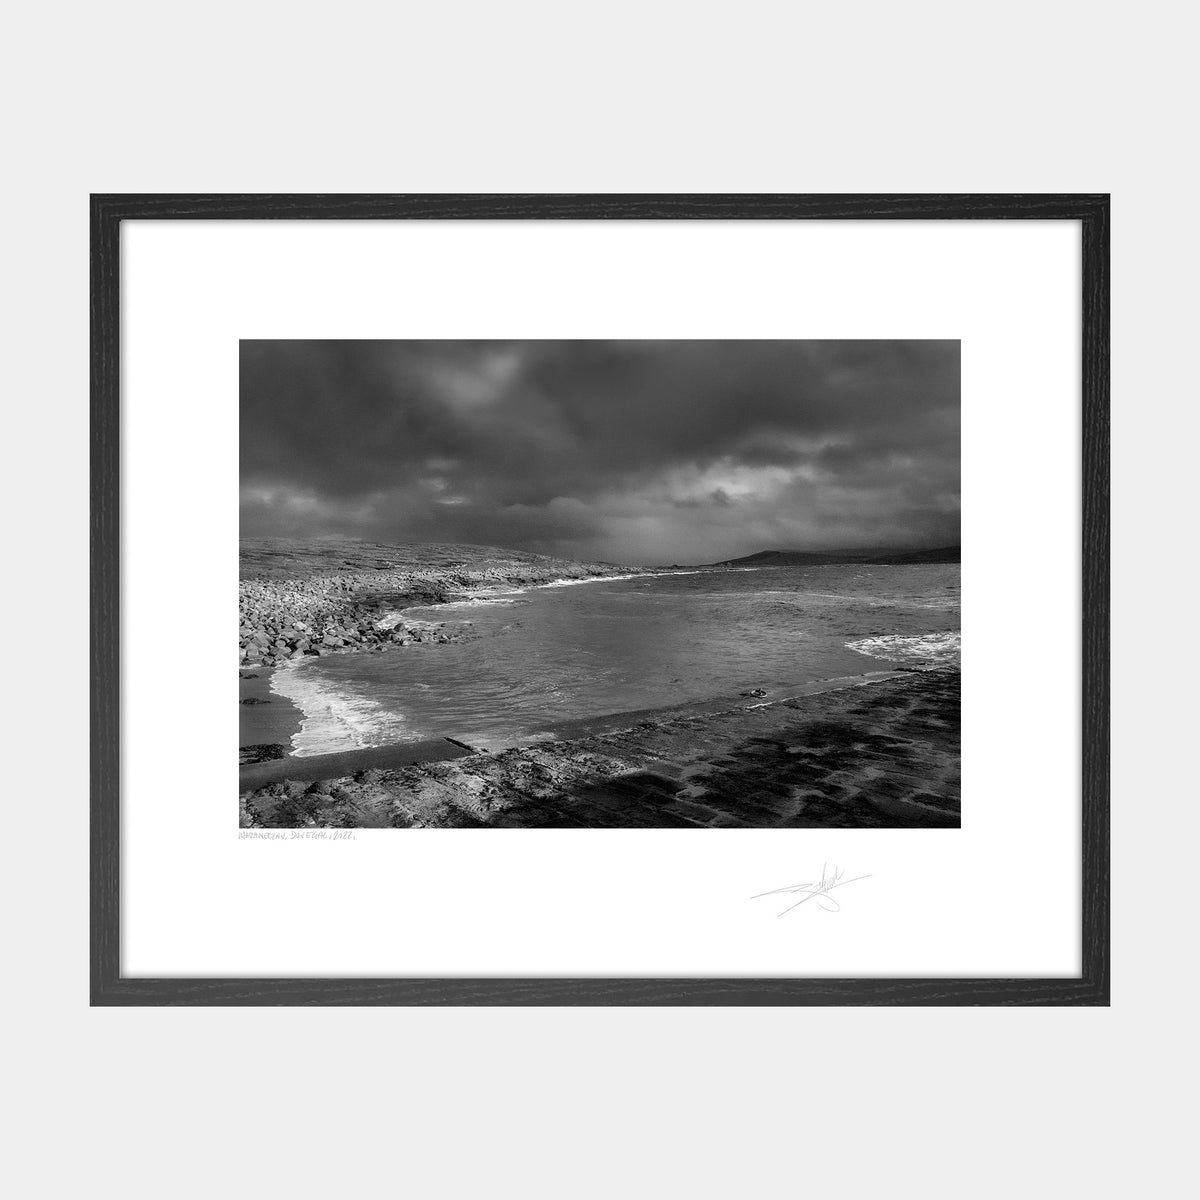 Donegal, Marameelan - Black and white photos | Giles Norman Gallery